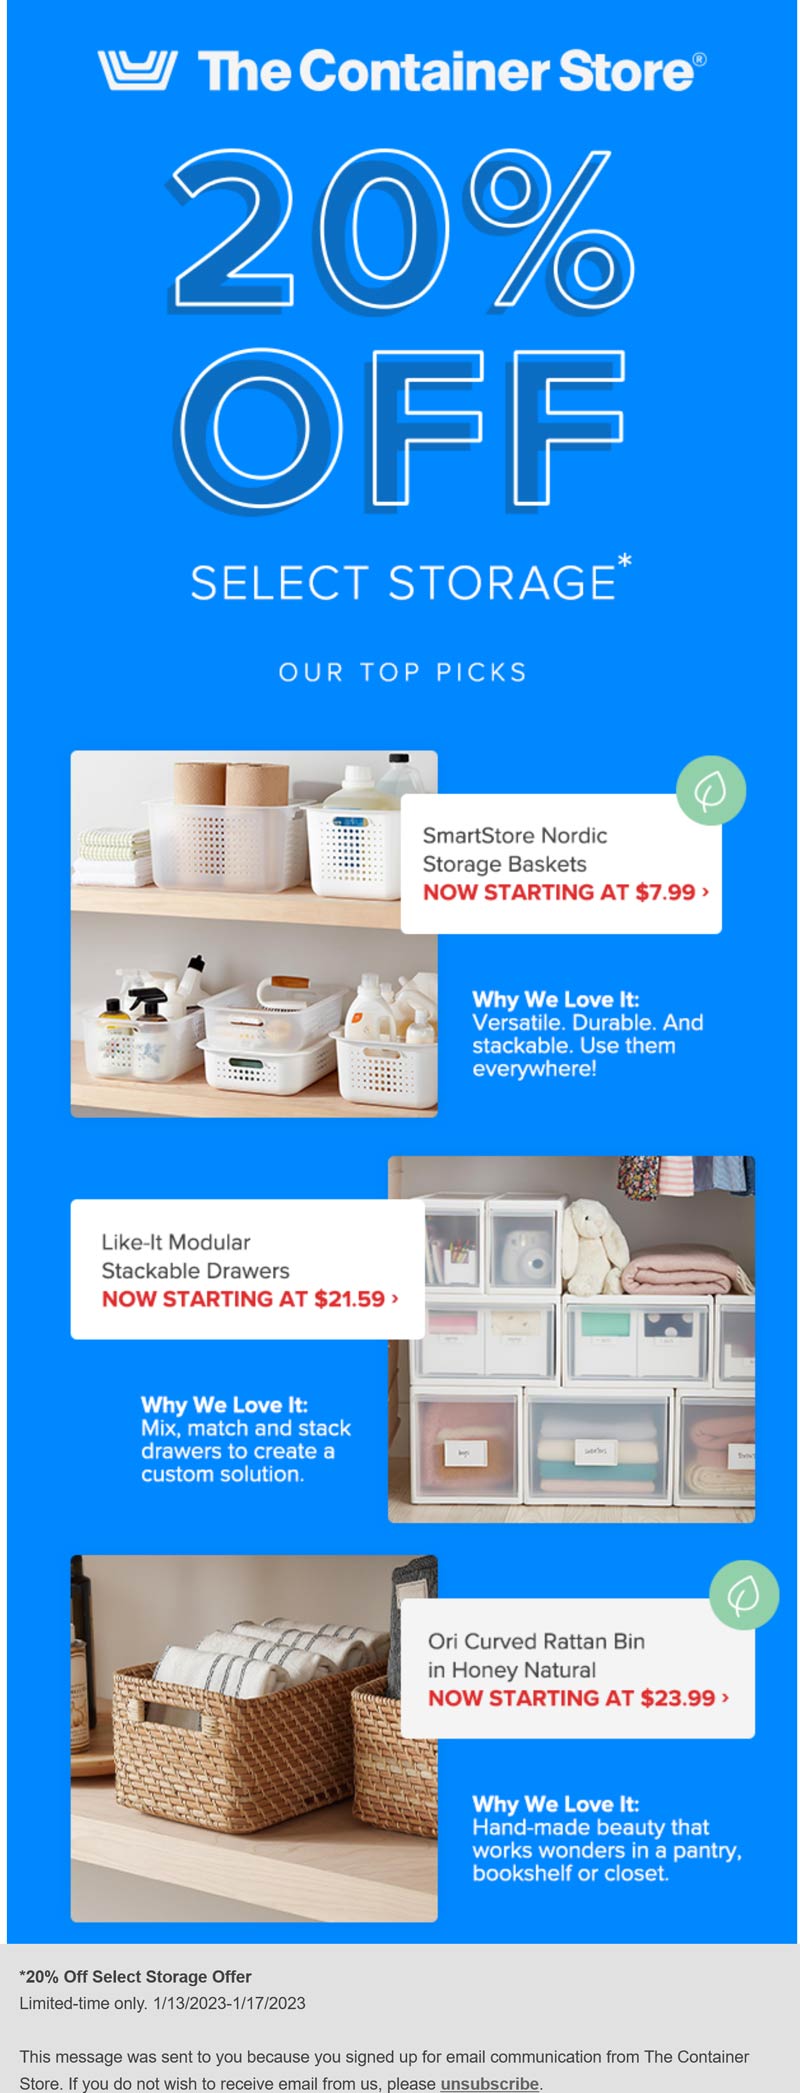 The Container Store coupons & promo code for [February 2023]